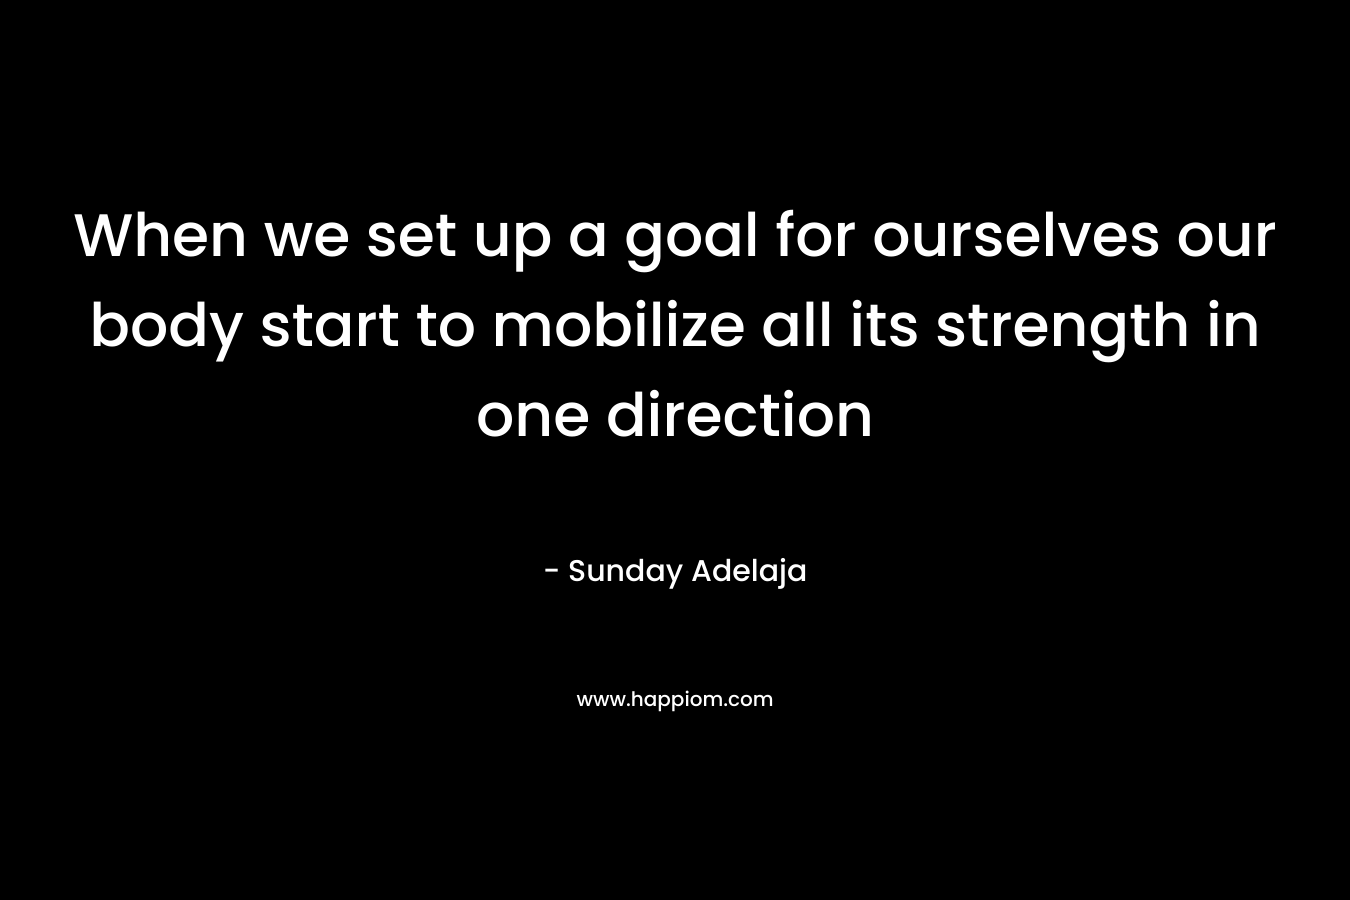 When we set up a goal for ourselves our body start to mobilize all its strength in one direction